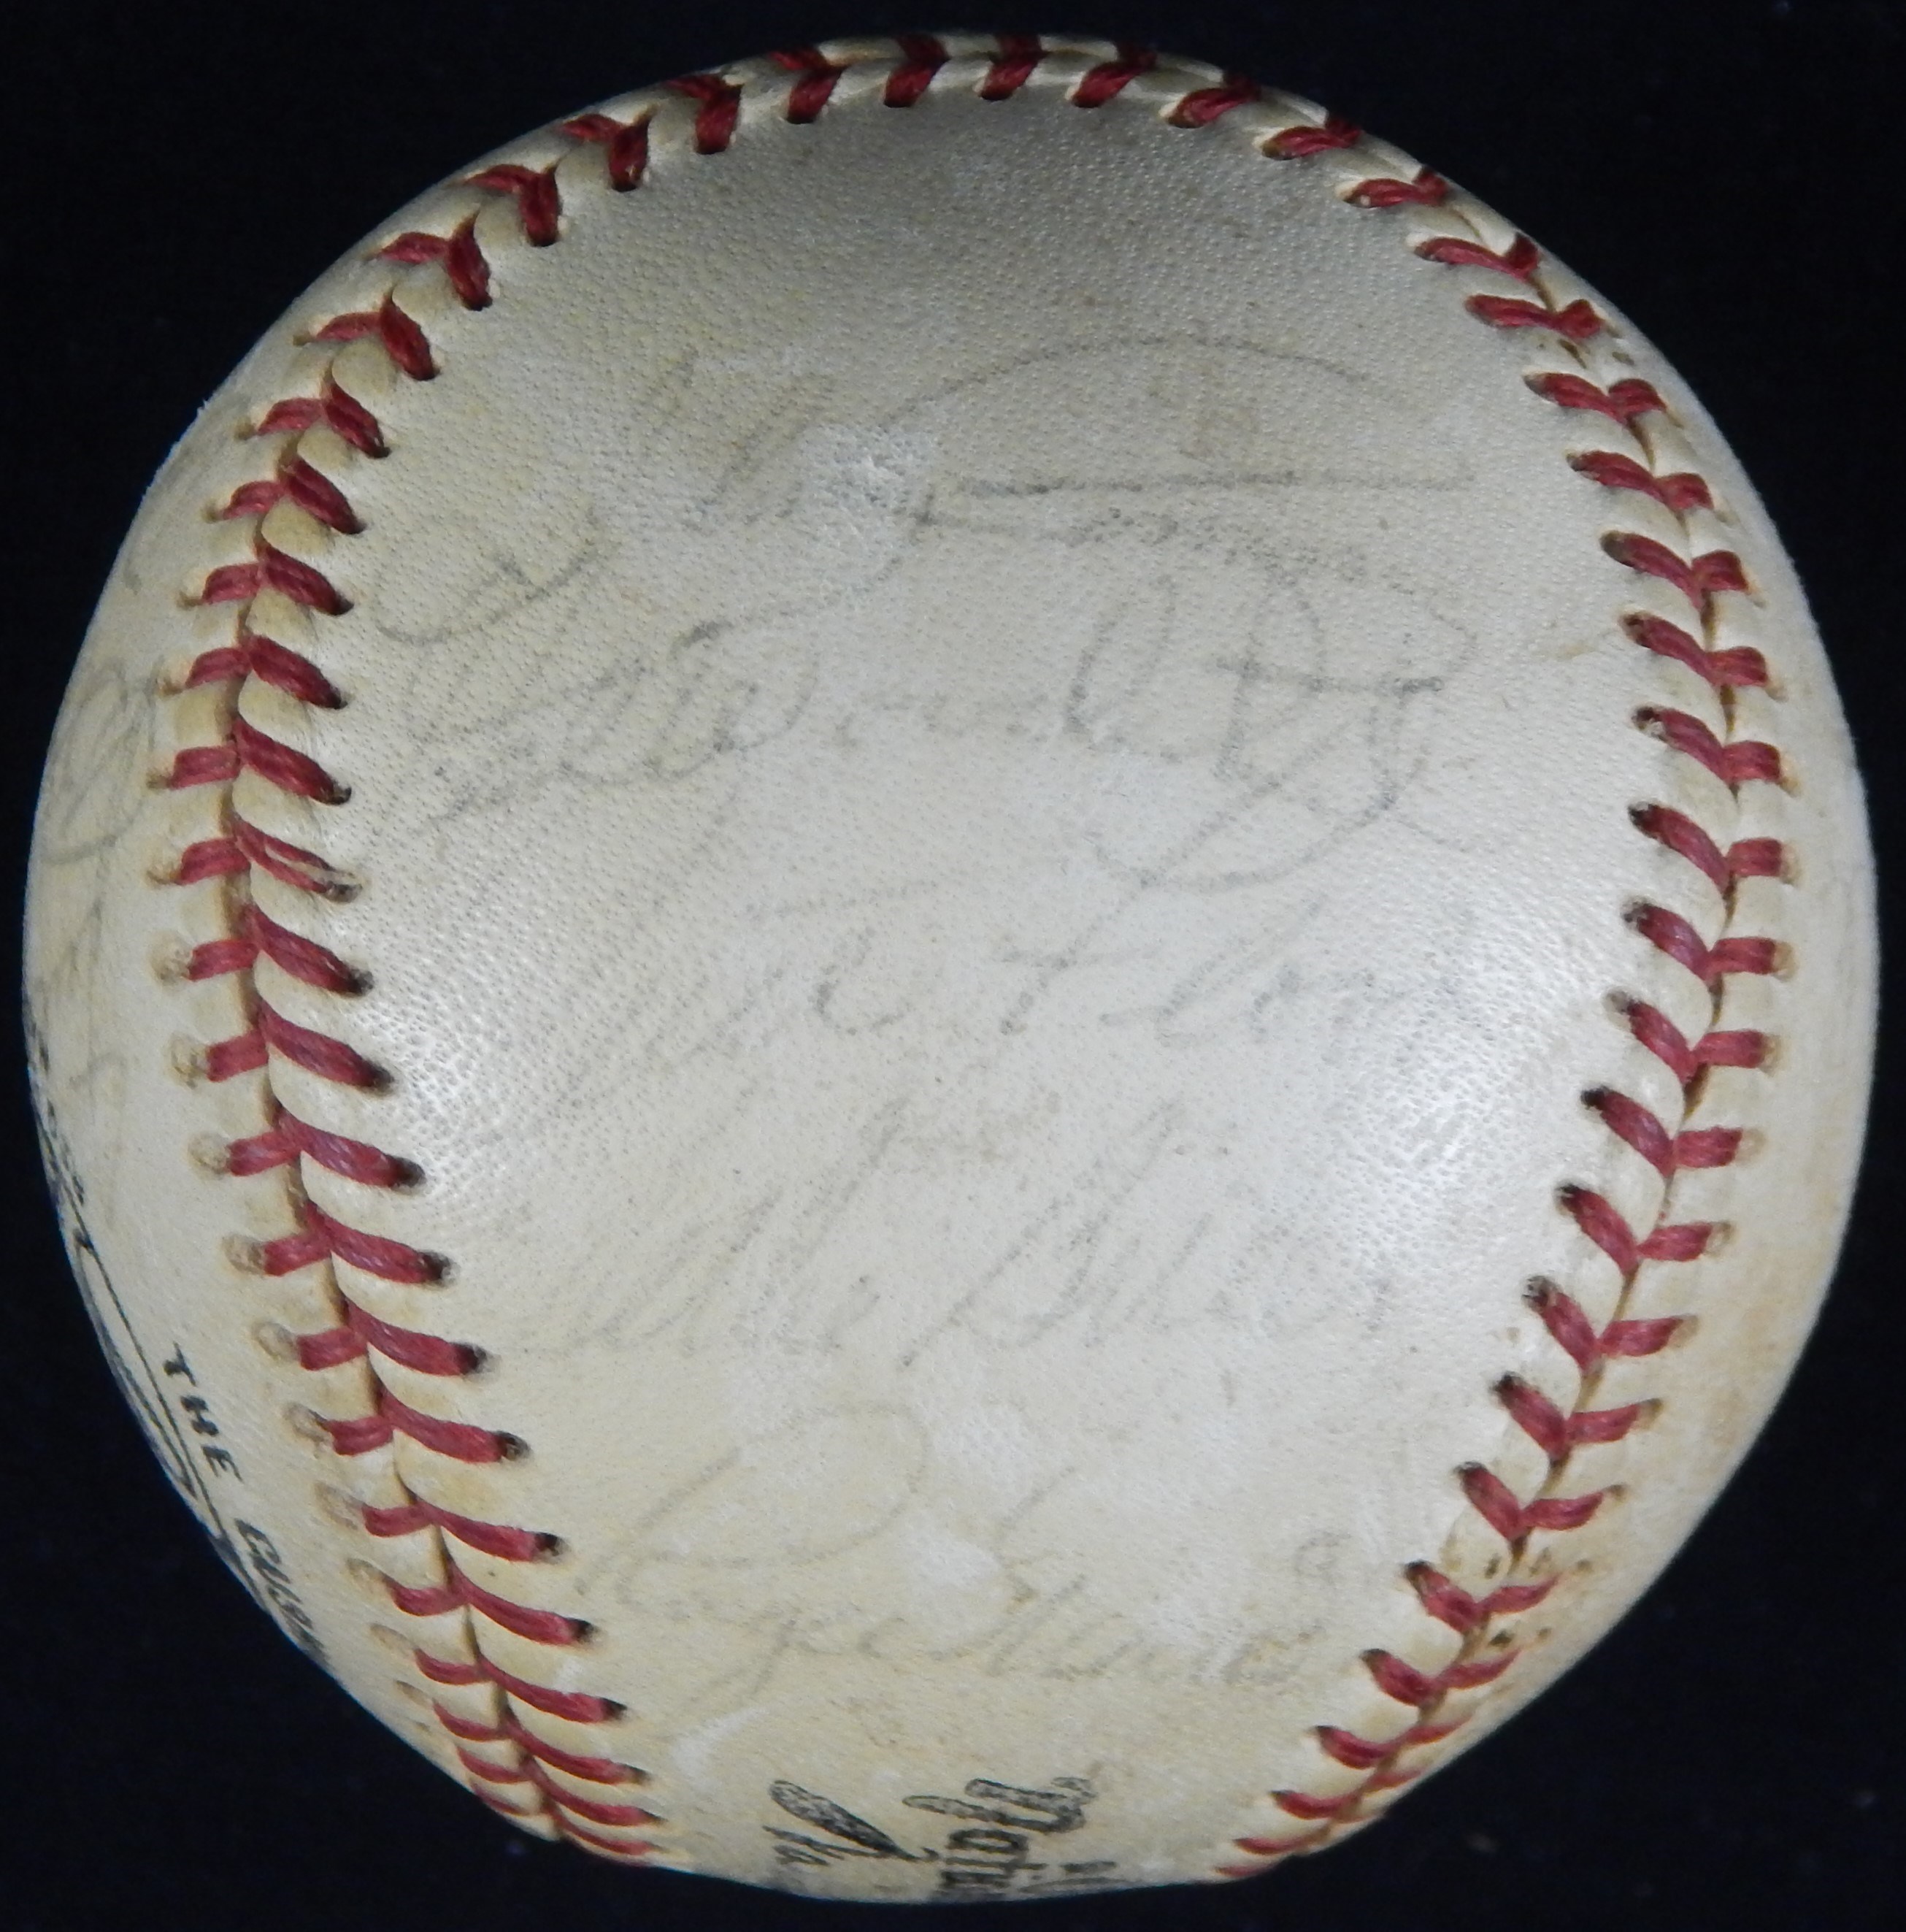 - 1967 St. Louis Cardinals World Series Champions Team Signed Baseball with 26 Signatures